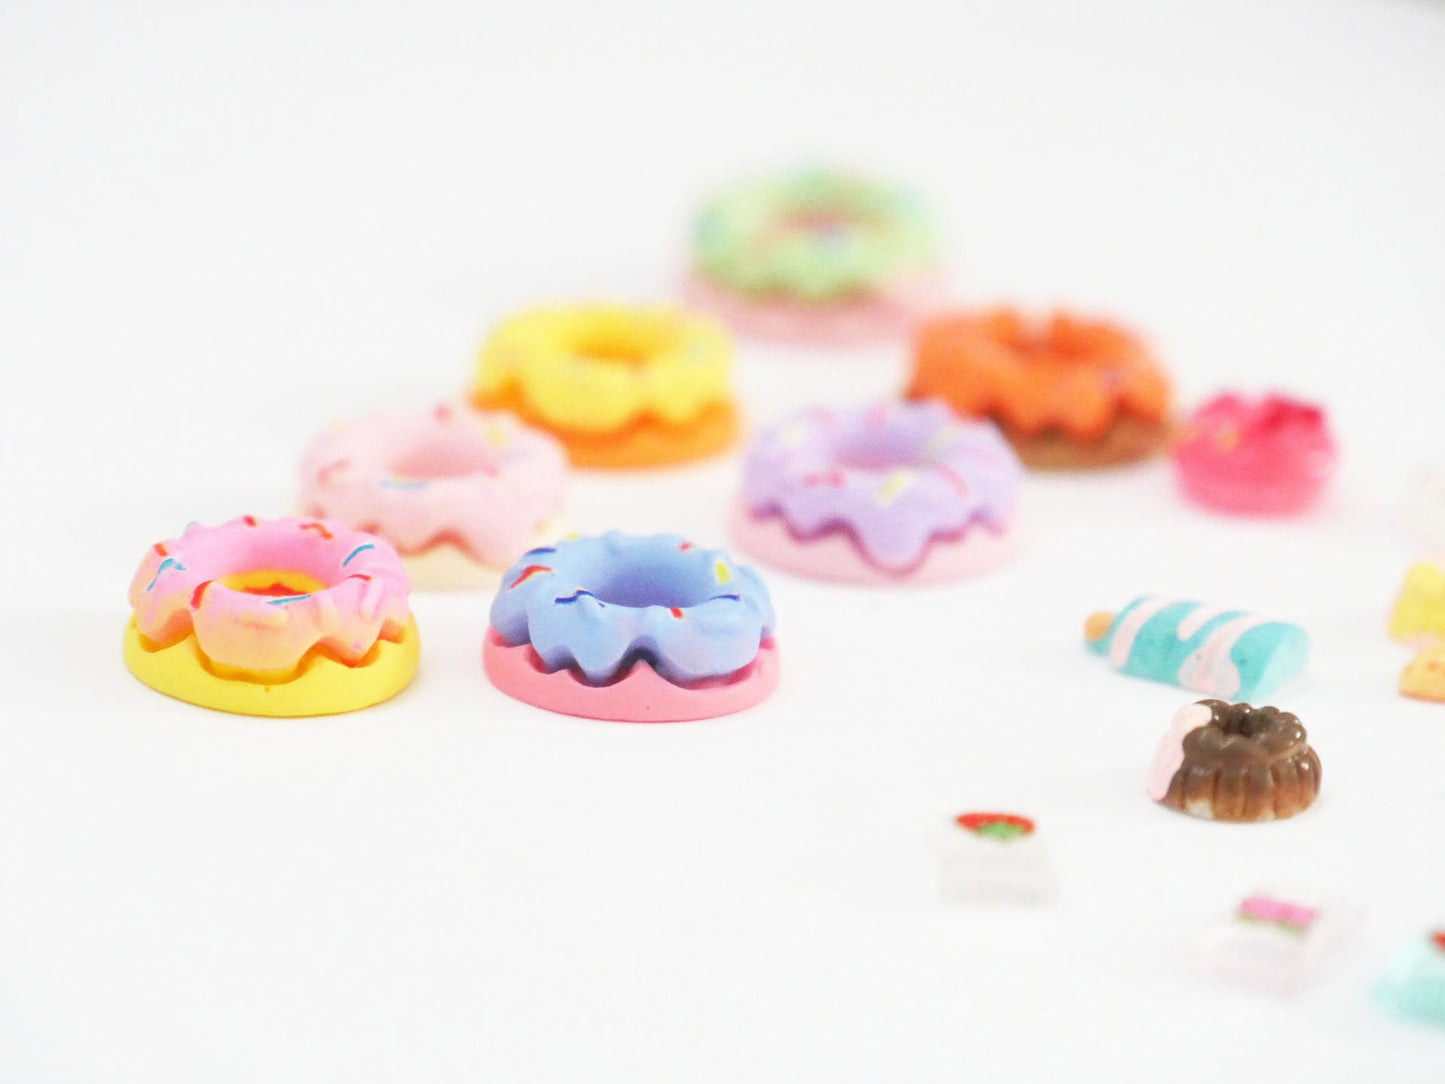 Miniature Donut Candy Sweets Nail Decal/ 3D Doll Afternoon Tea Charms / Chocolate Ice Cream Dessert Accessories Nail crafts